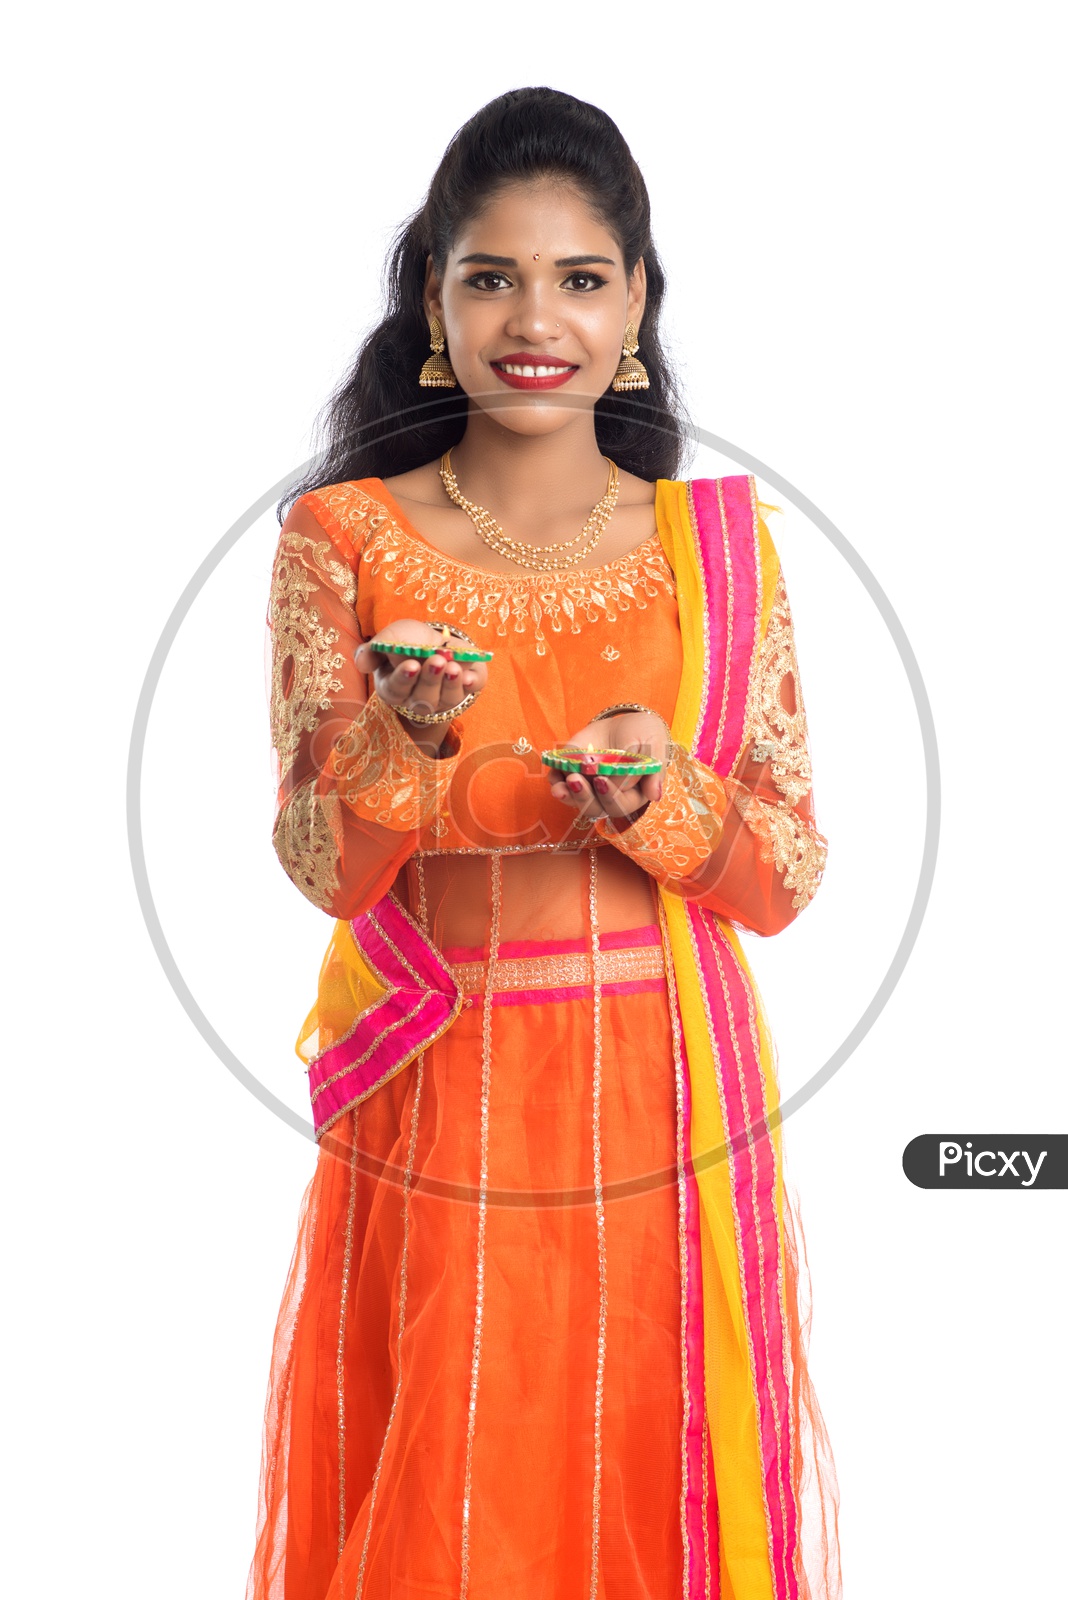 A young traditional smiling pretty Indian woman holding diyas in hand